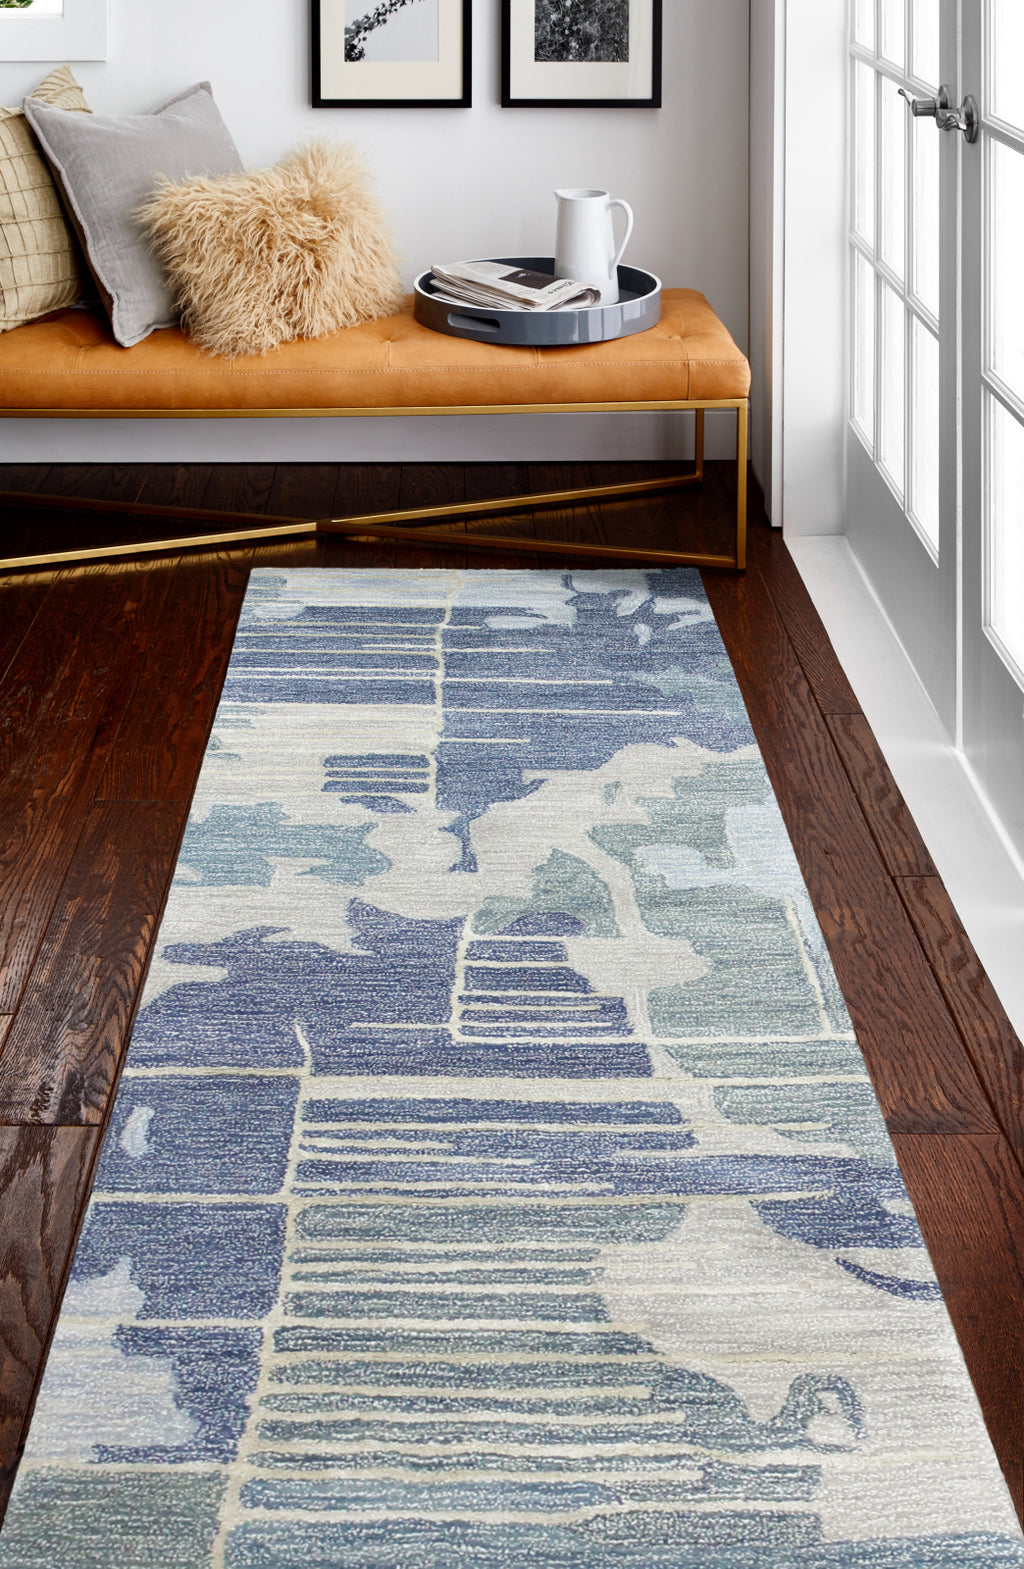 Bashian Greenwich R129-HG377 Area Rug Lifestyle Image Feature